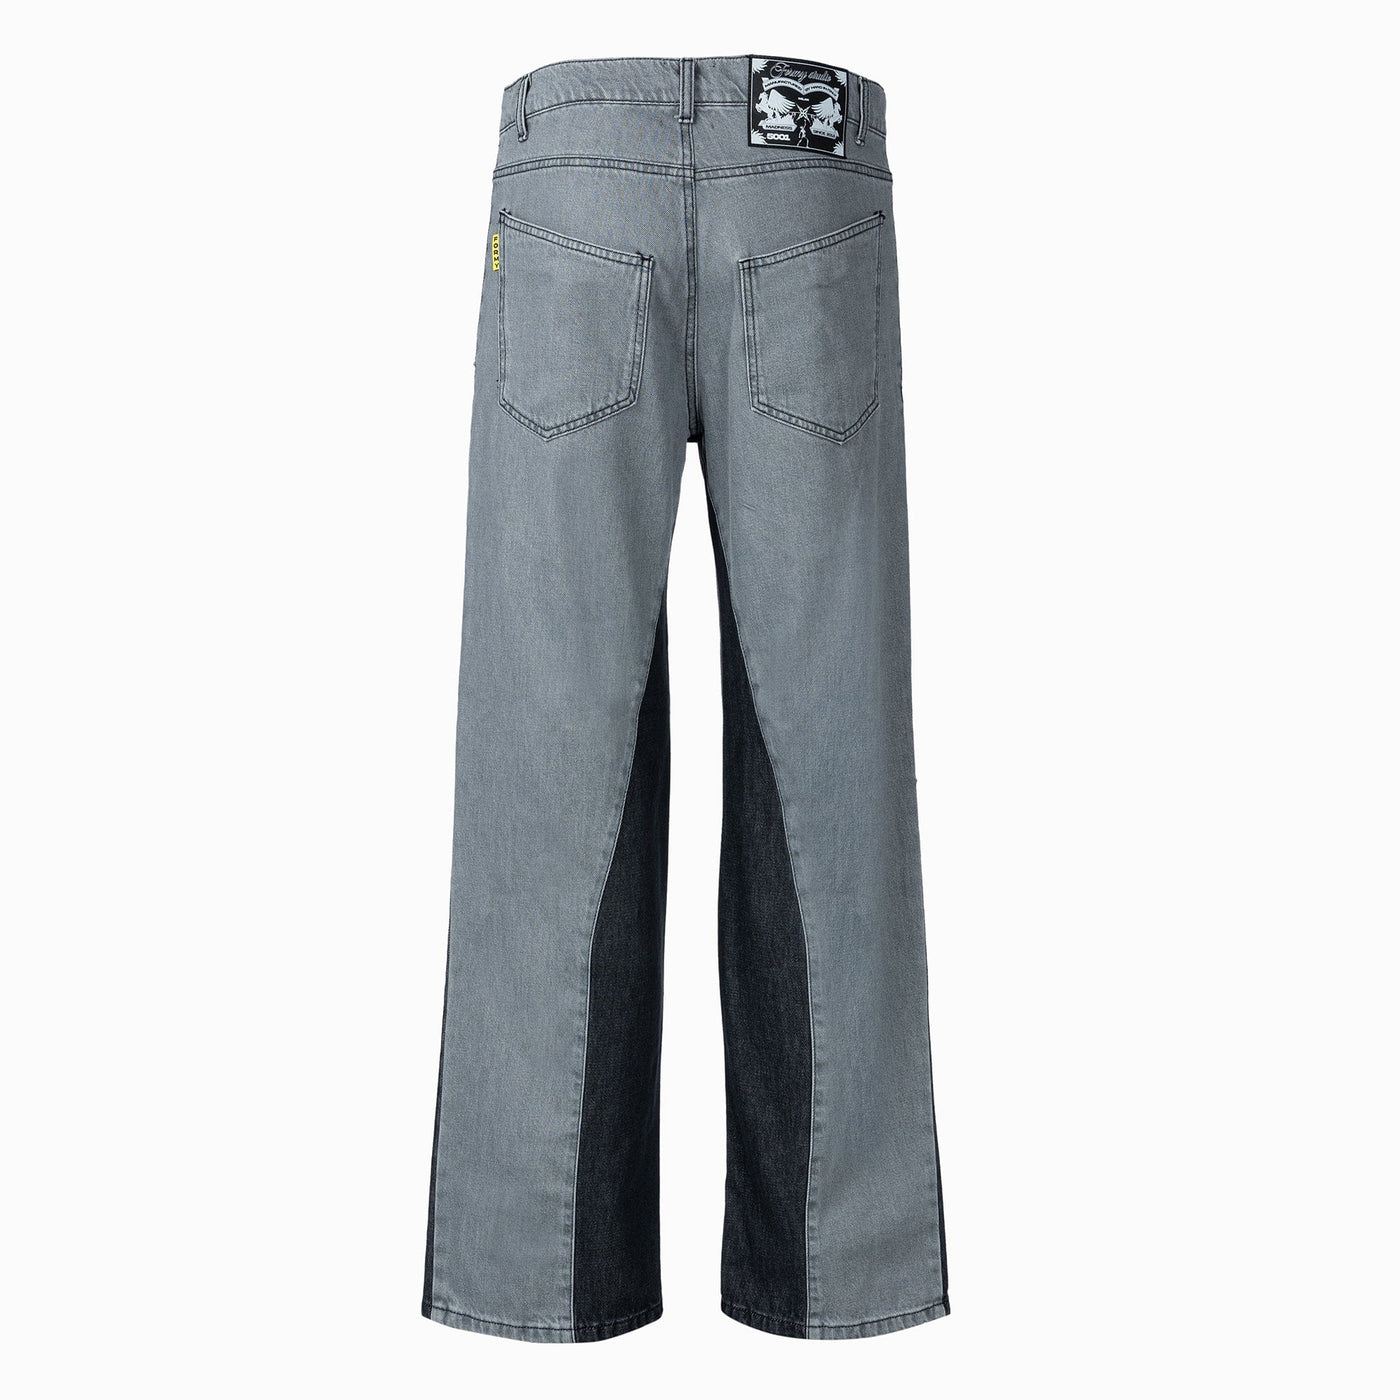 Formy Studio Two Packs Pant